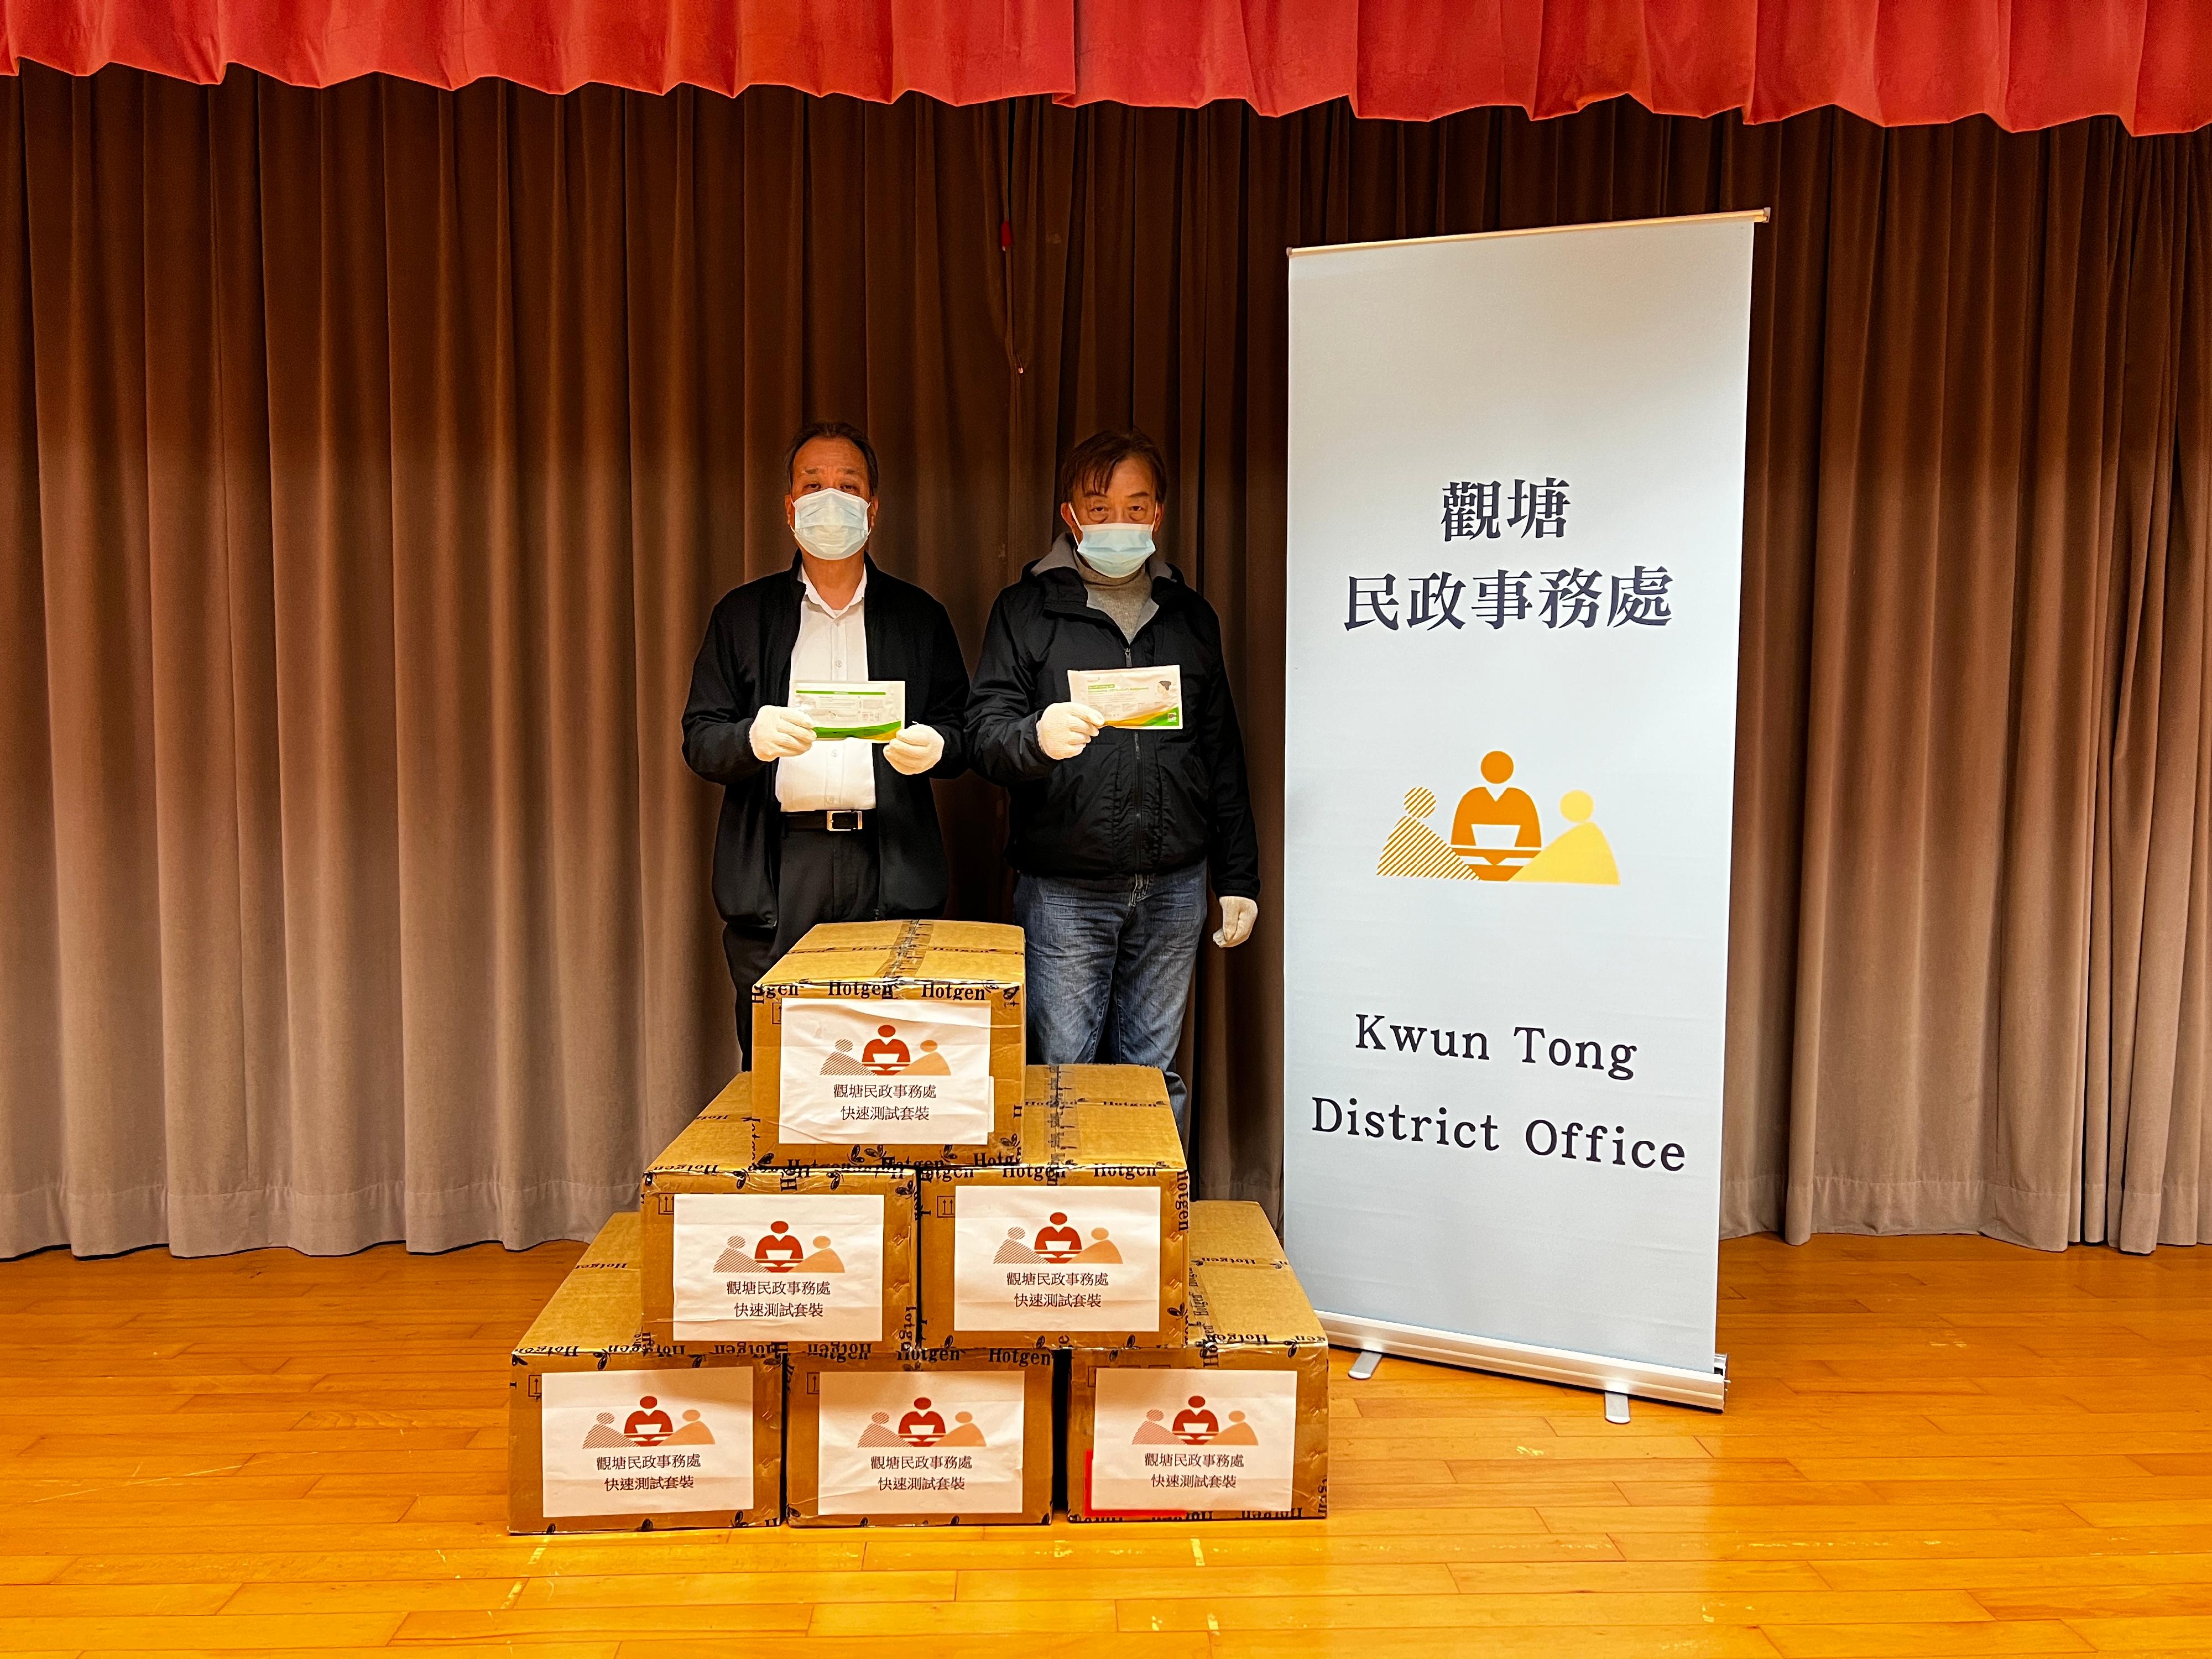 The Kwun Tong District Office today (February 28) distributed COVID-19 rapid test kits to households, cleansing workers and property management staff living and working in Sau Ming House of Sau Mau Ping Estate, Tin Chu House, Tin Hang House, Tin Lok House and Tin Chi House of Shun Tin Estate, and Sau Wong House of Sau Mau Ping South Estate in Kwun Tong for voluntary testing through the Housing Department and the property management companies. 